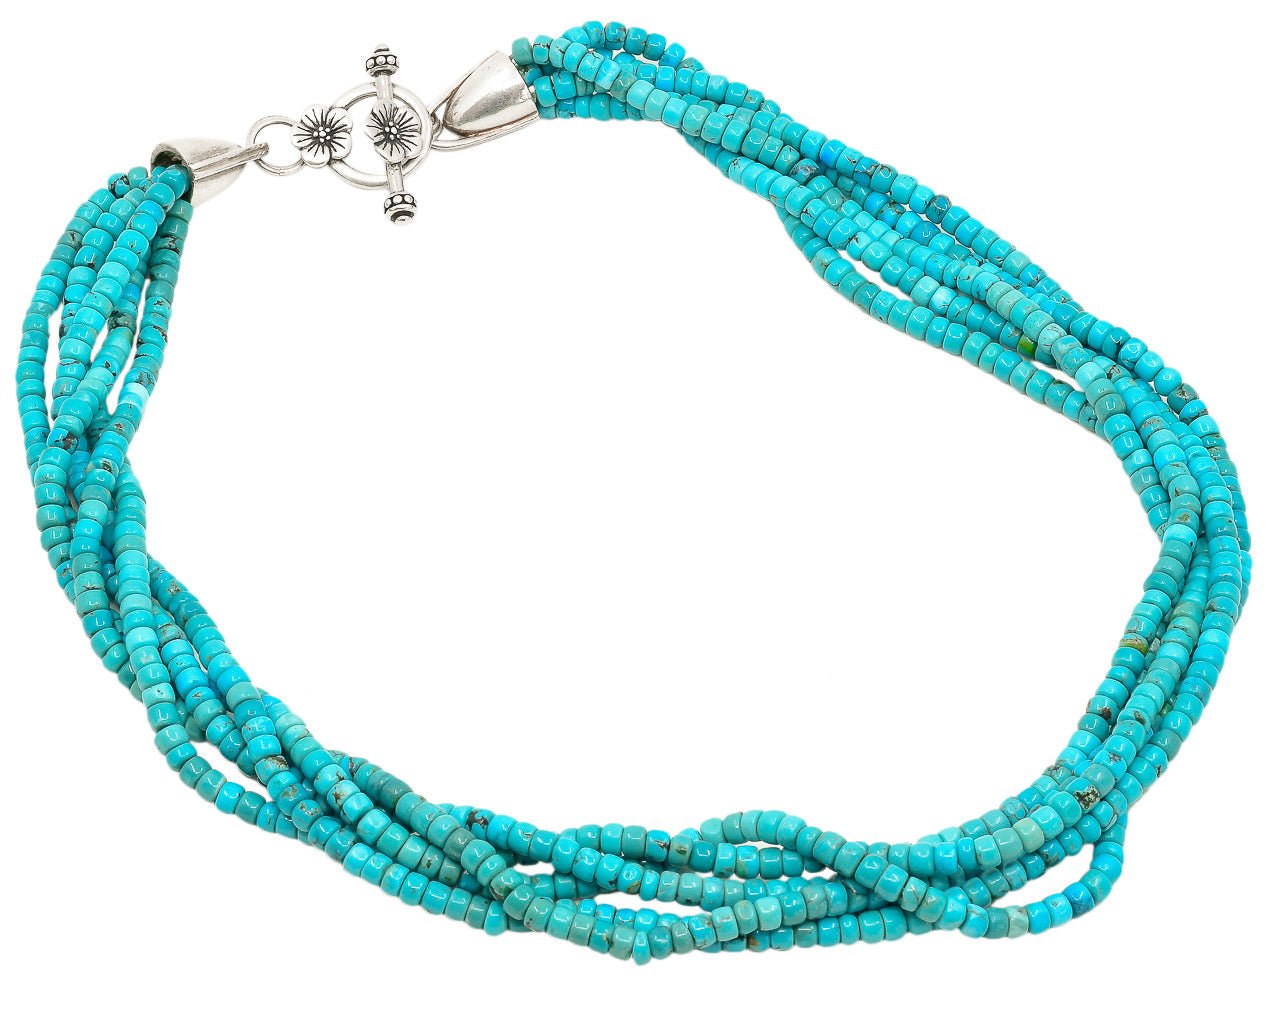 Five Strand Necklace of Deep Blue Turquoise Beads - Turquoise & Tufa